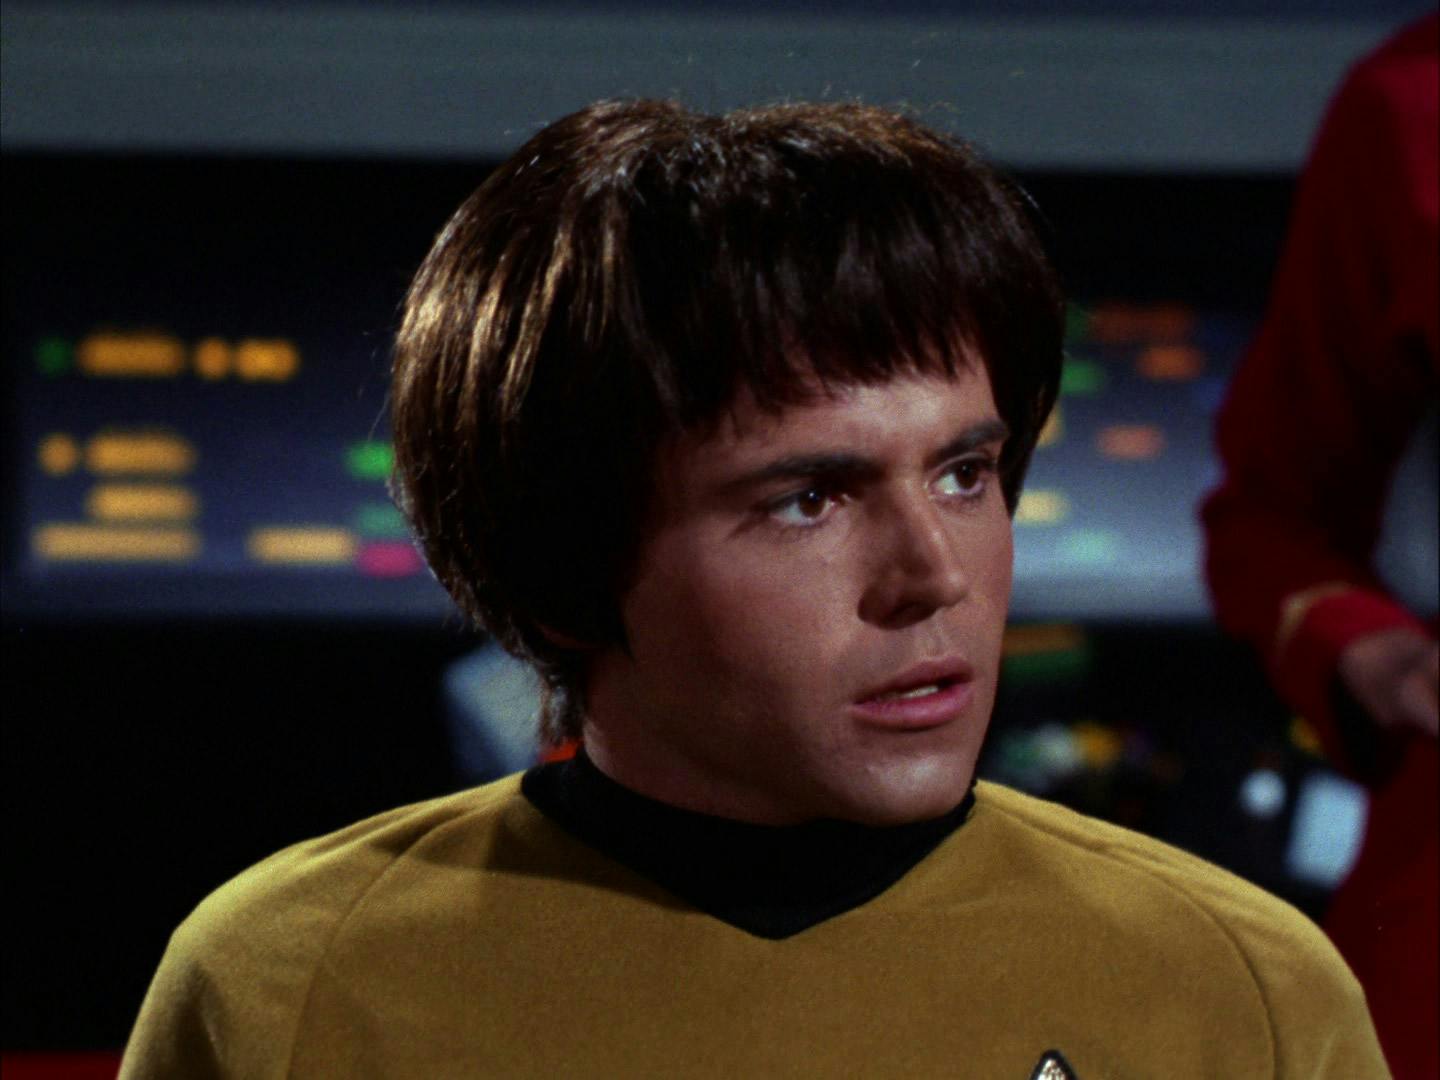 Chekov incredulously looks over at DeSalle in the center seat after he questions his scanner readings in 'Catspaw'